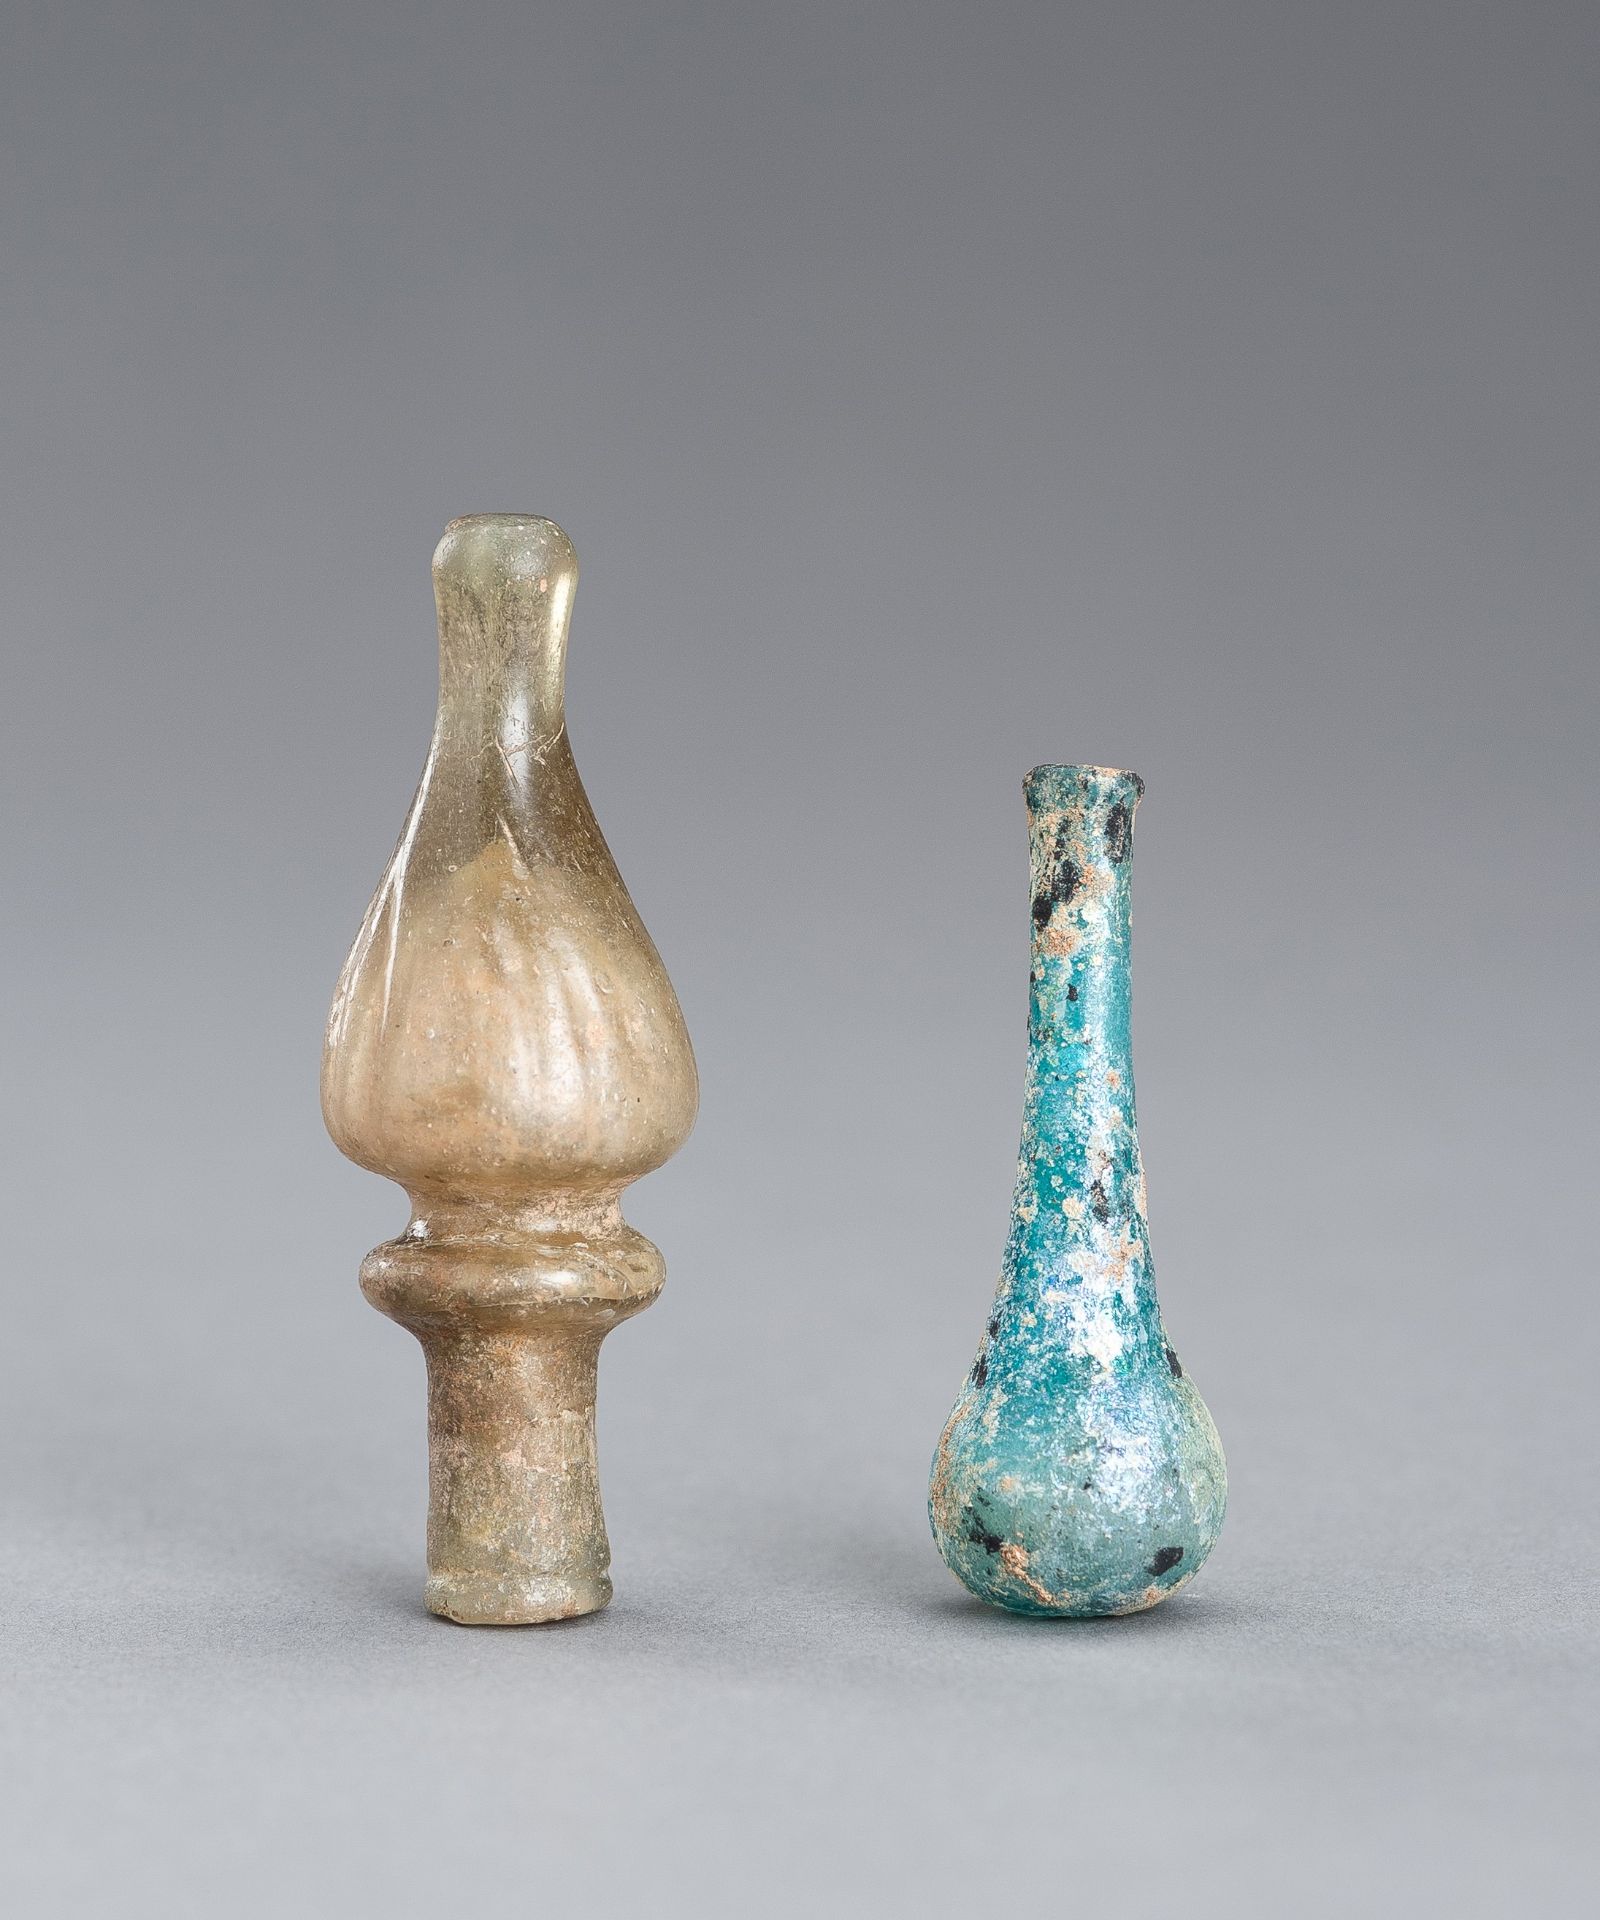 A GLASS STOPPER AND MINIATURE VASE